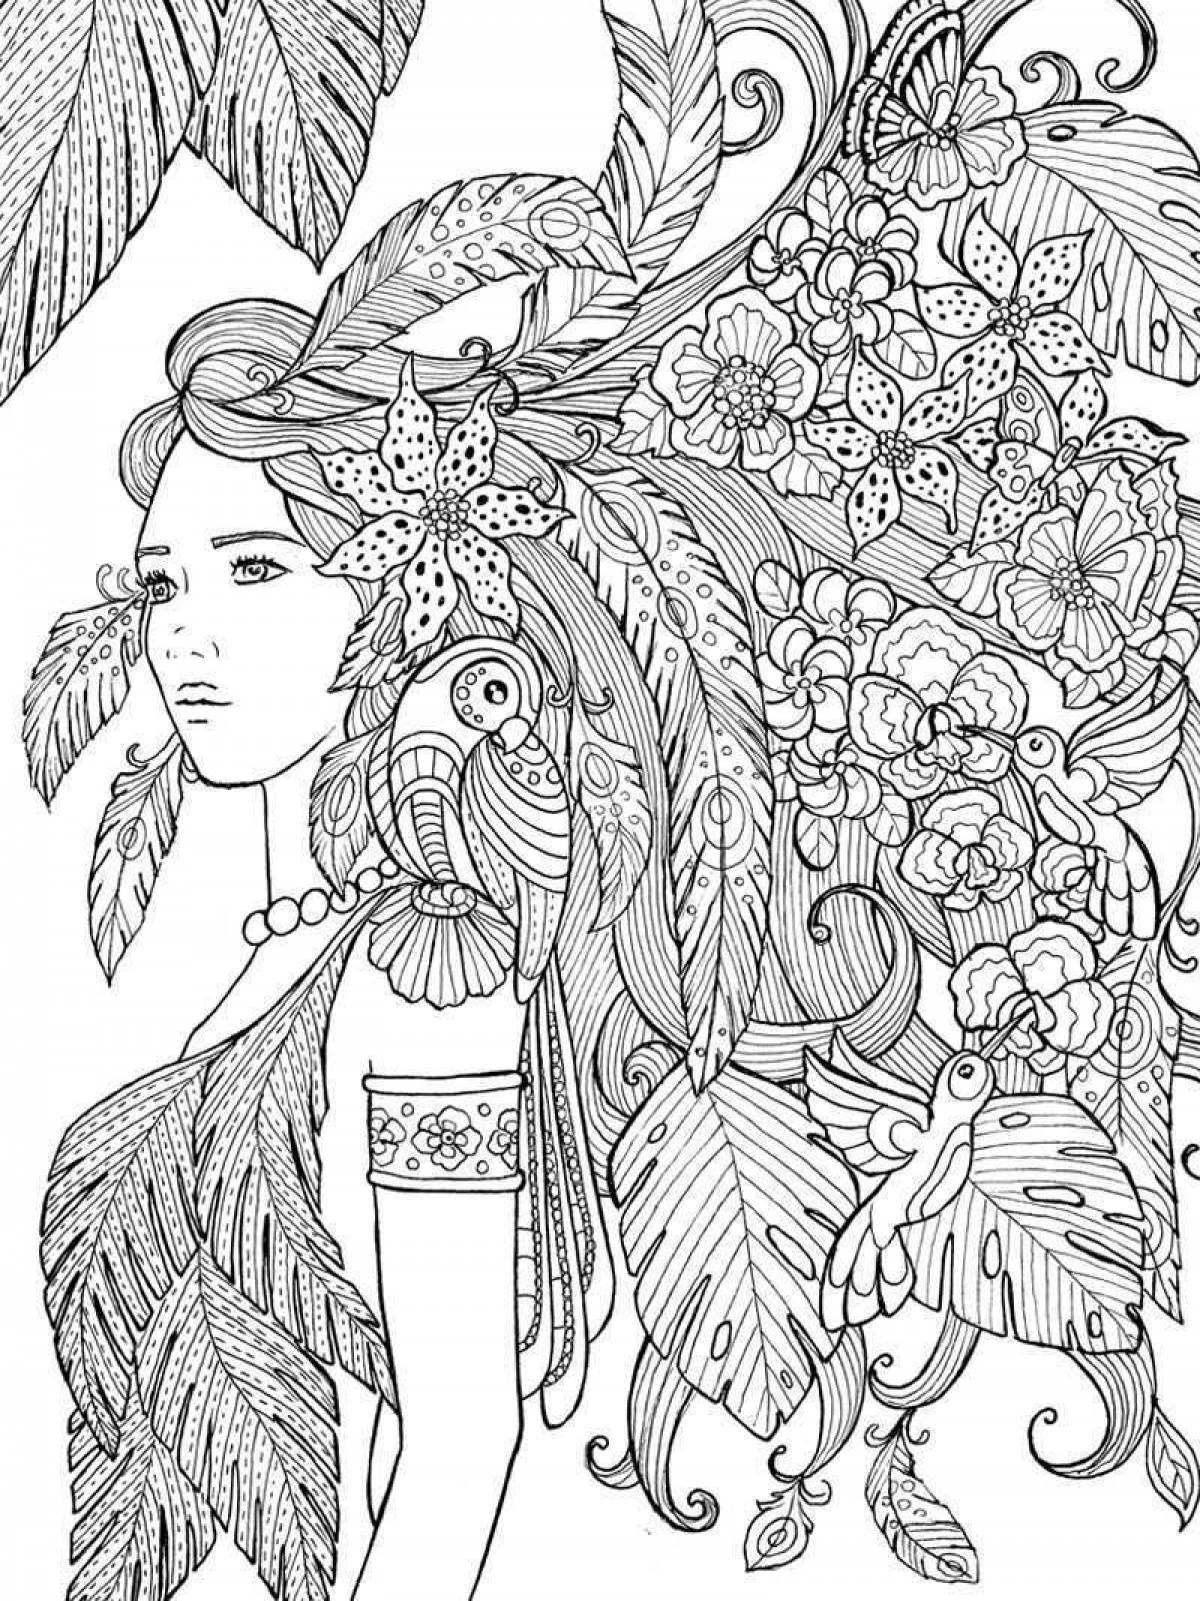 Harmony anti-stress coloring book for adults